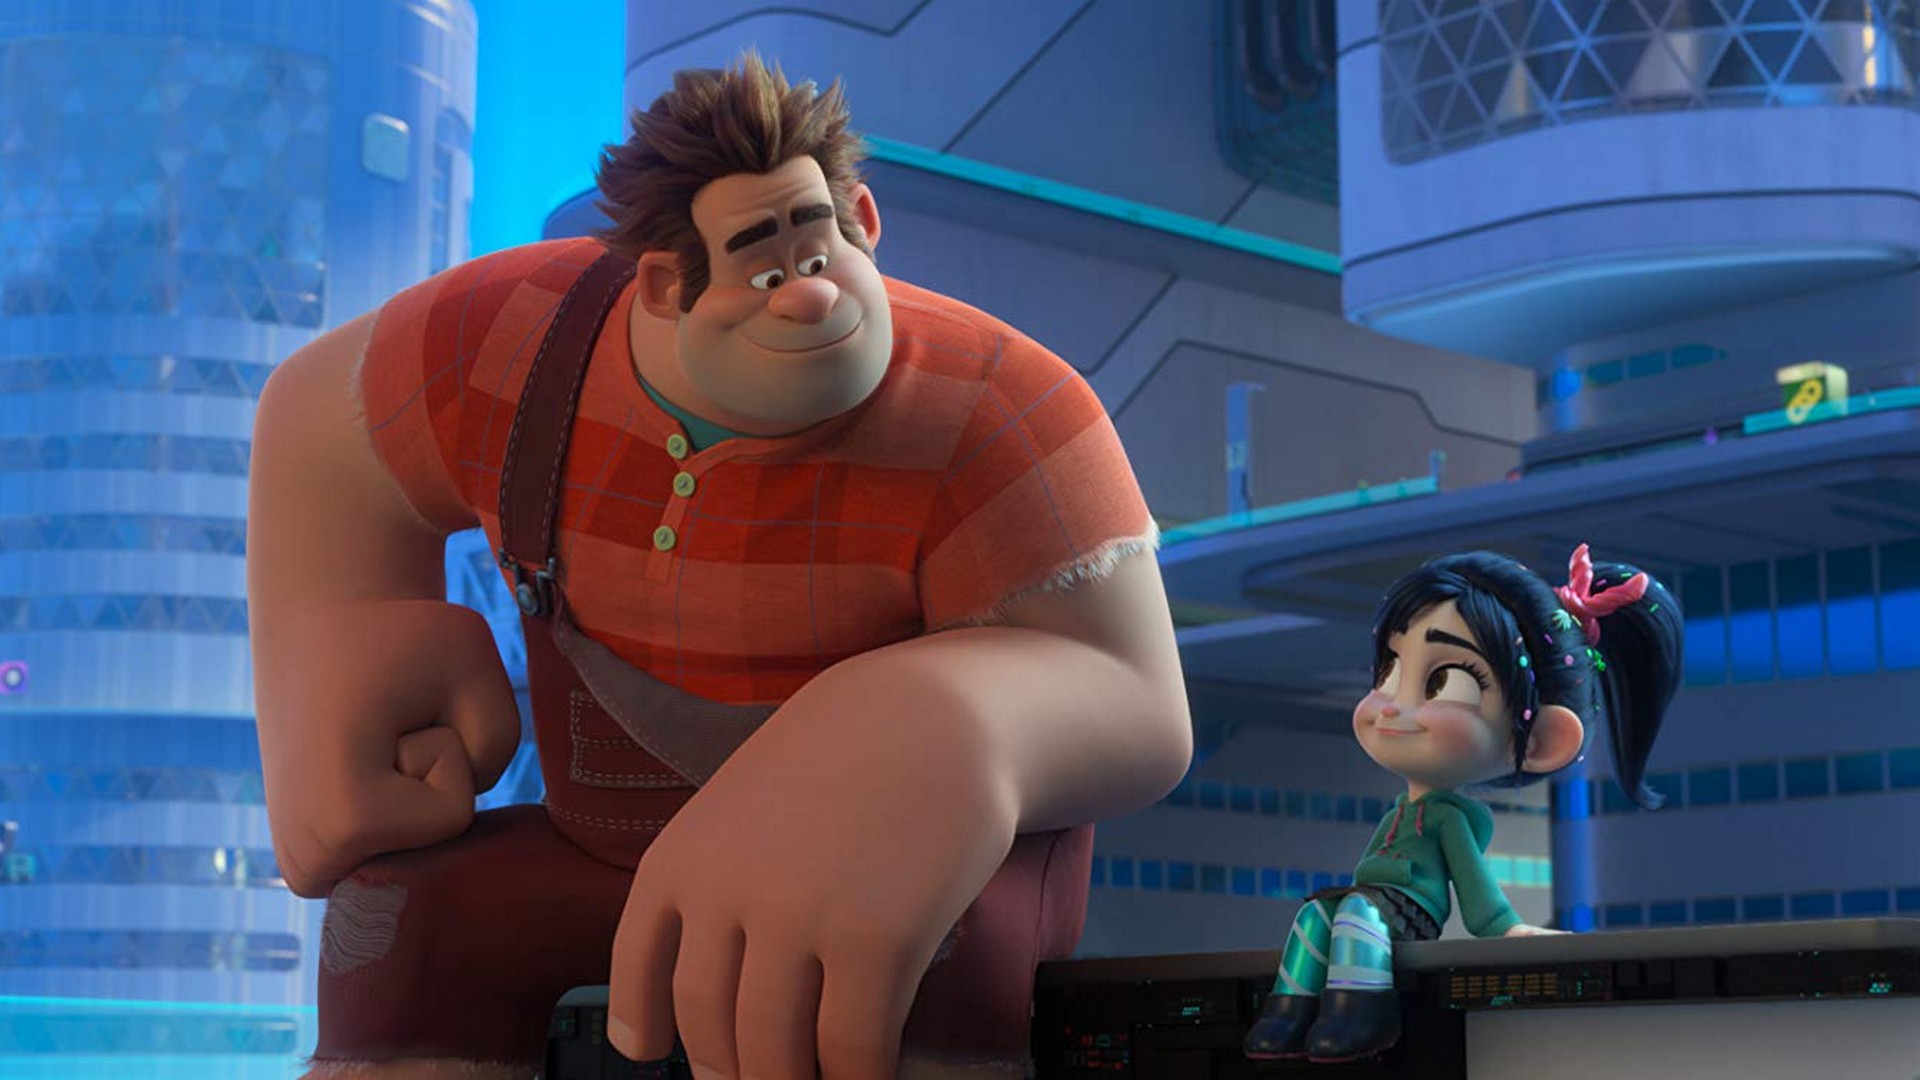 Wallpapers Wreck-It Ralph 2 2018 with resolution 1920x1080 pixel. You can make this wallpaper for your Mac or Windows Desktop Background, iPhone, Android or Tablet and another Smartphone device